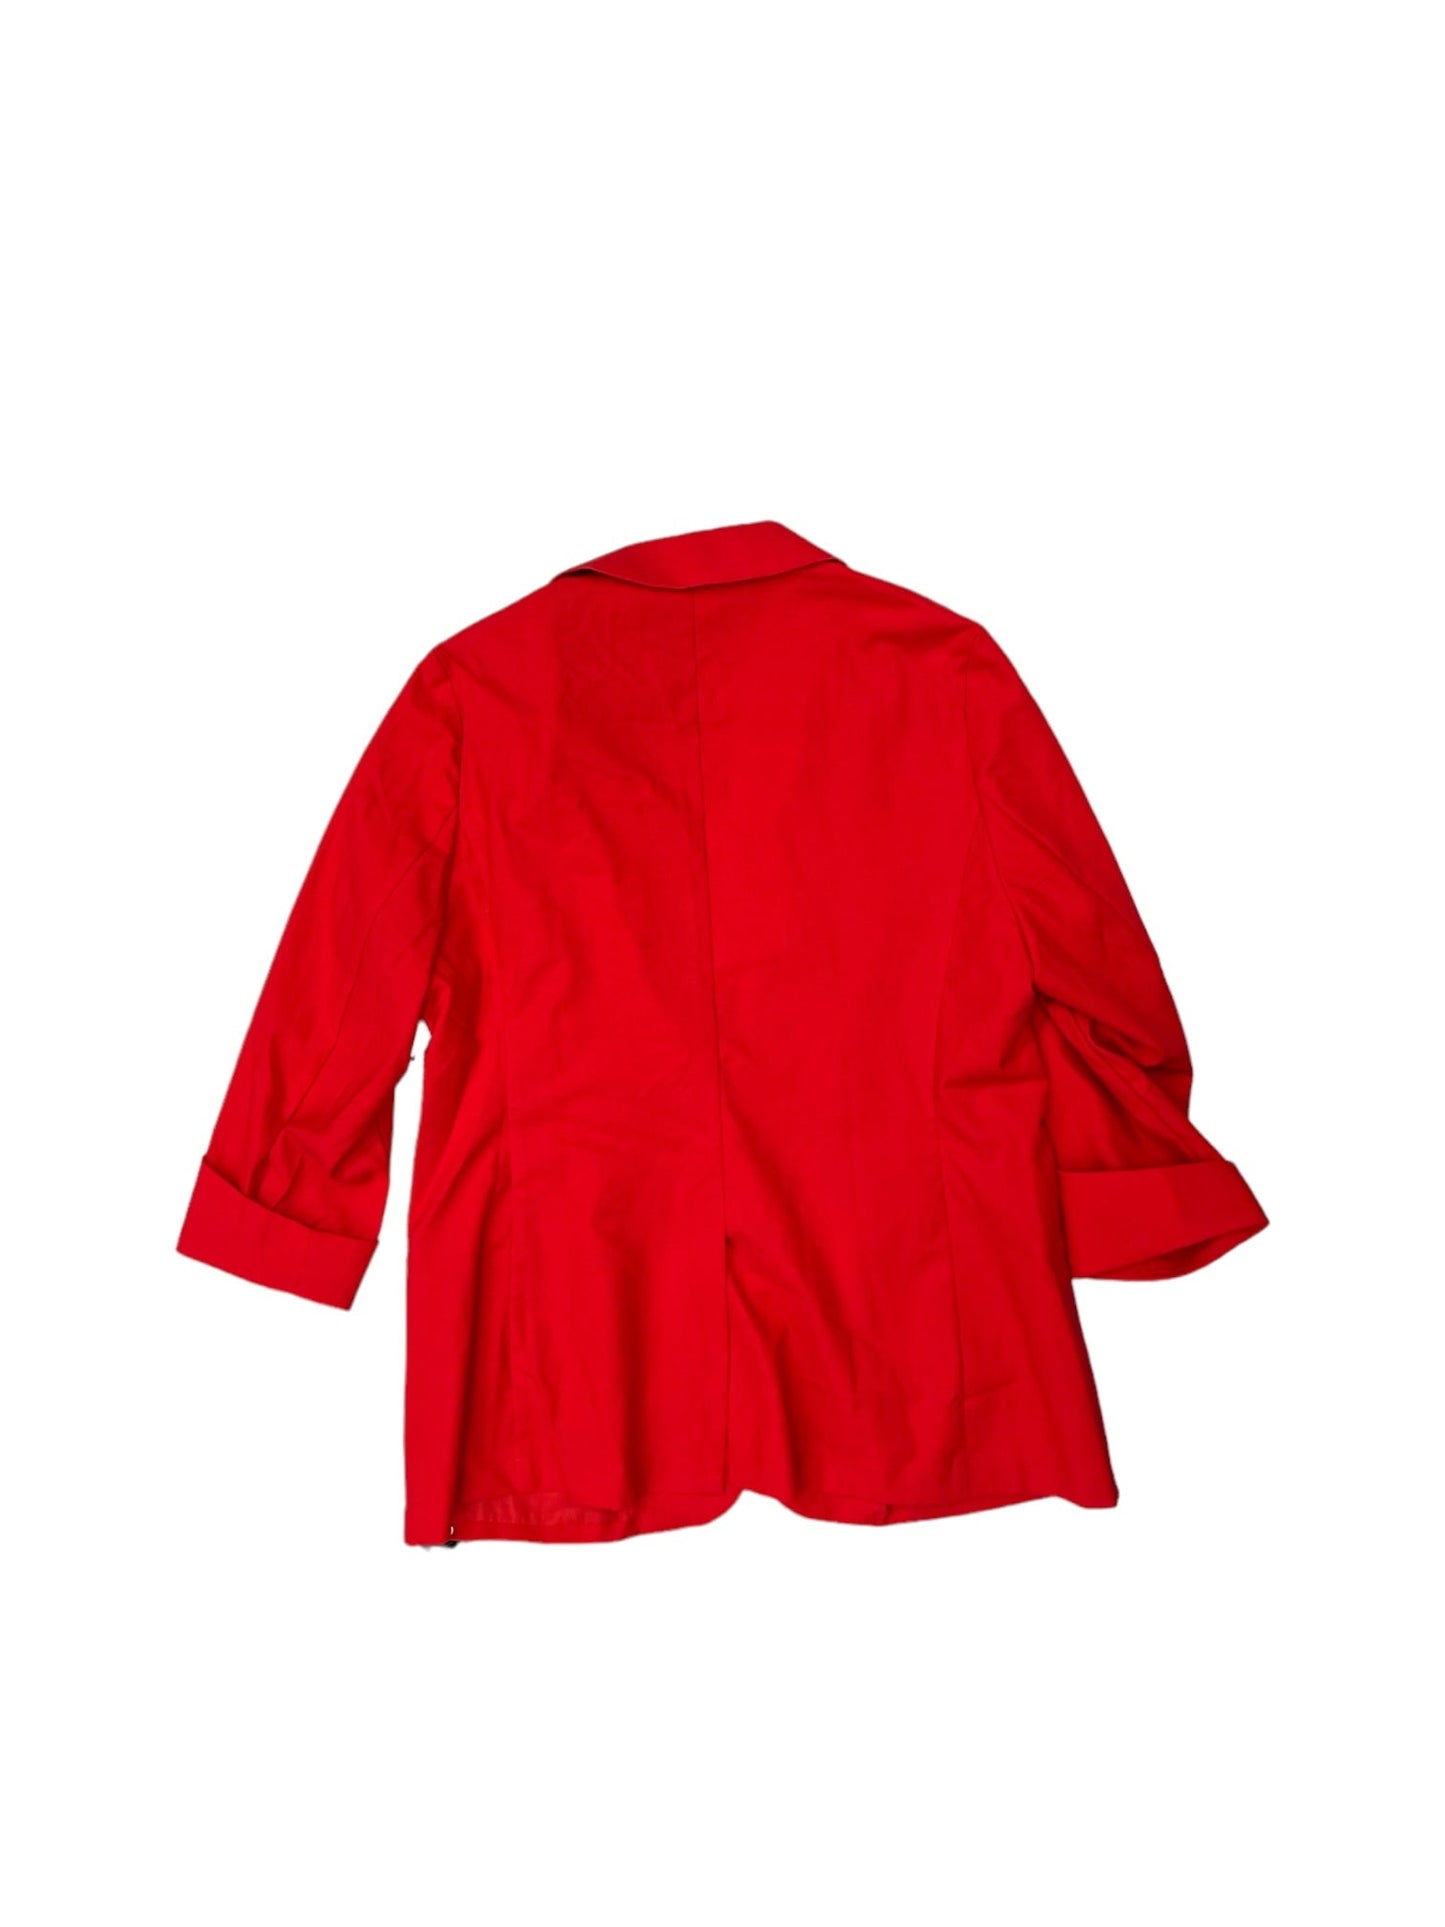 Red Blazer Clothes Mentor, Size L